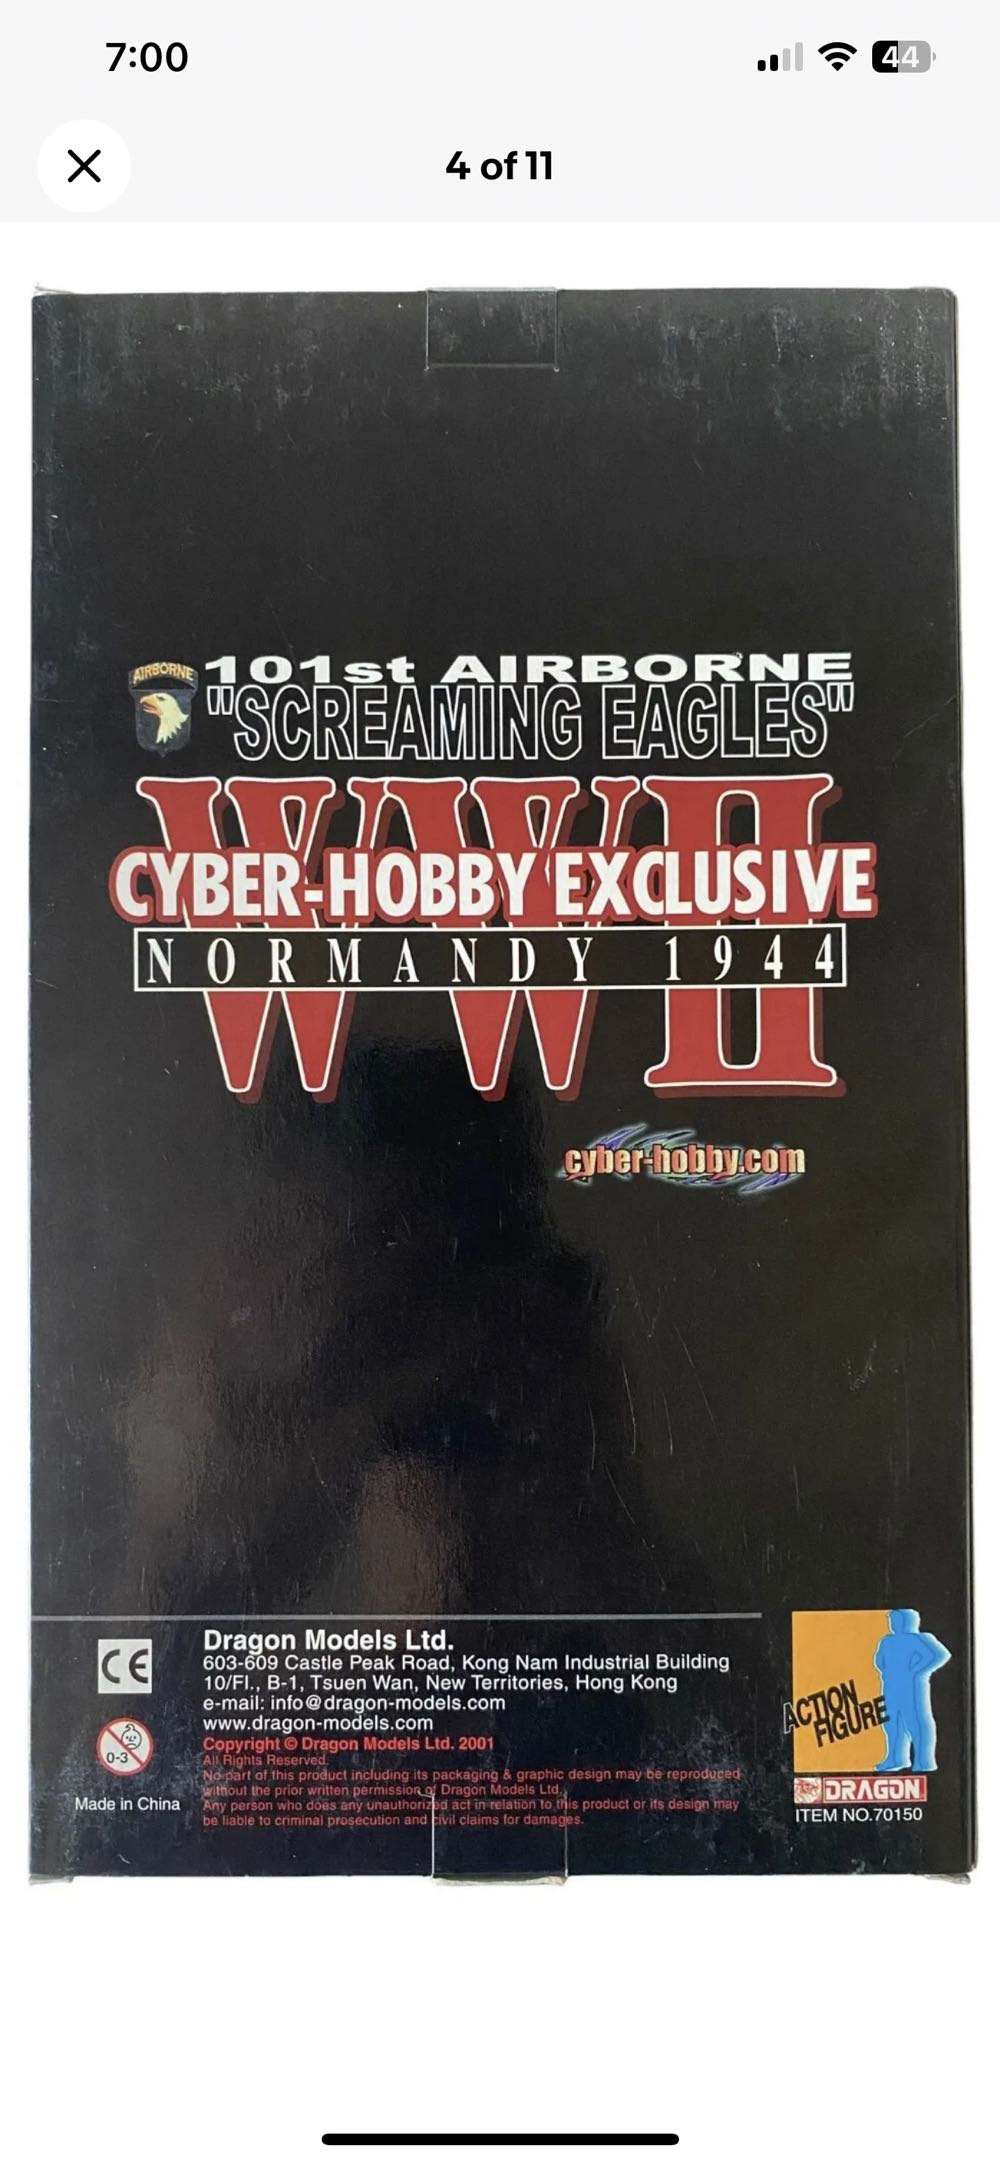 Cyber-Hobby Exclusive - WWII 101st Airborne - Dragon Models Ltd. (WWII Normandy 1945) action figure collectible - Main Image 3